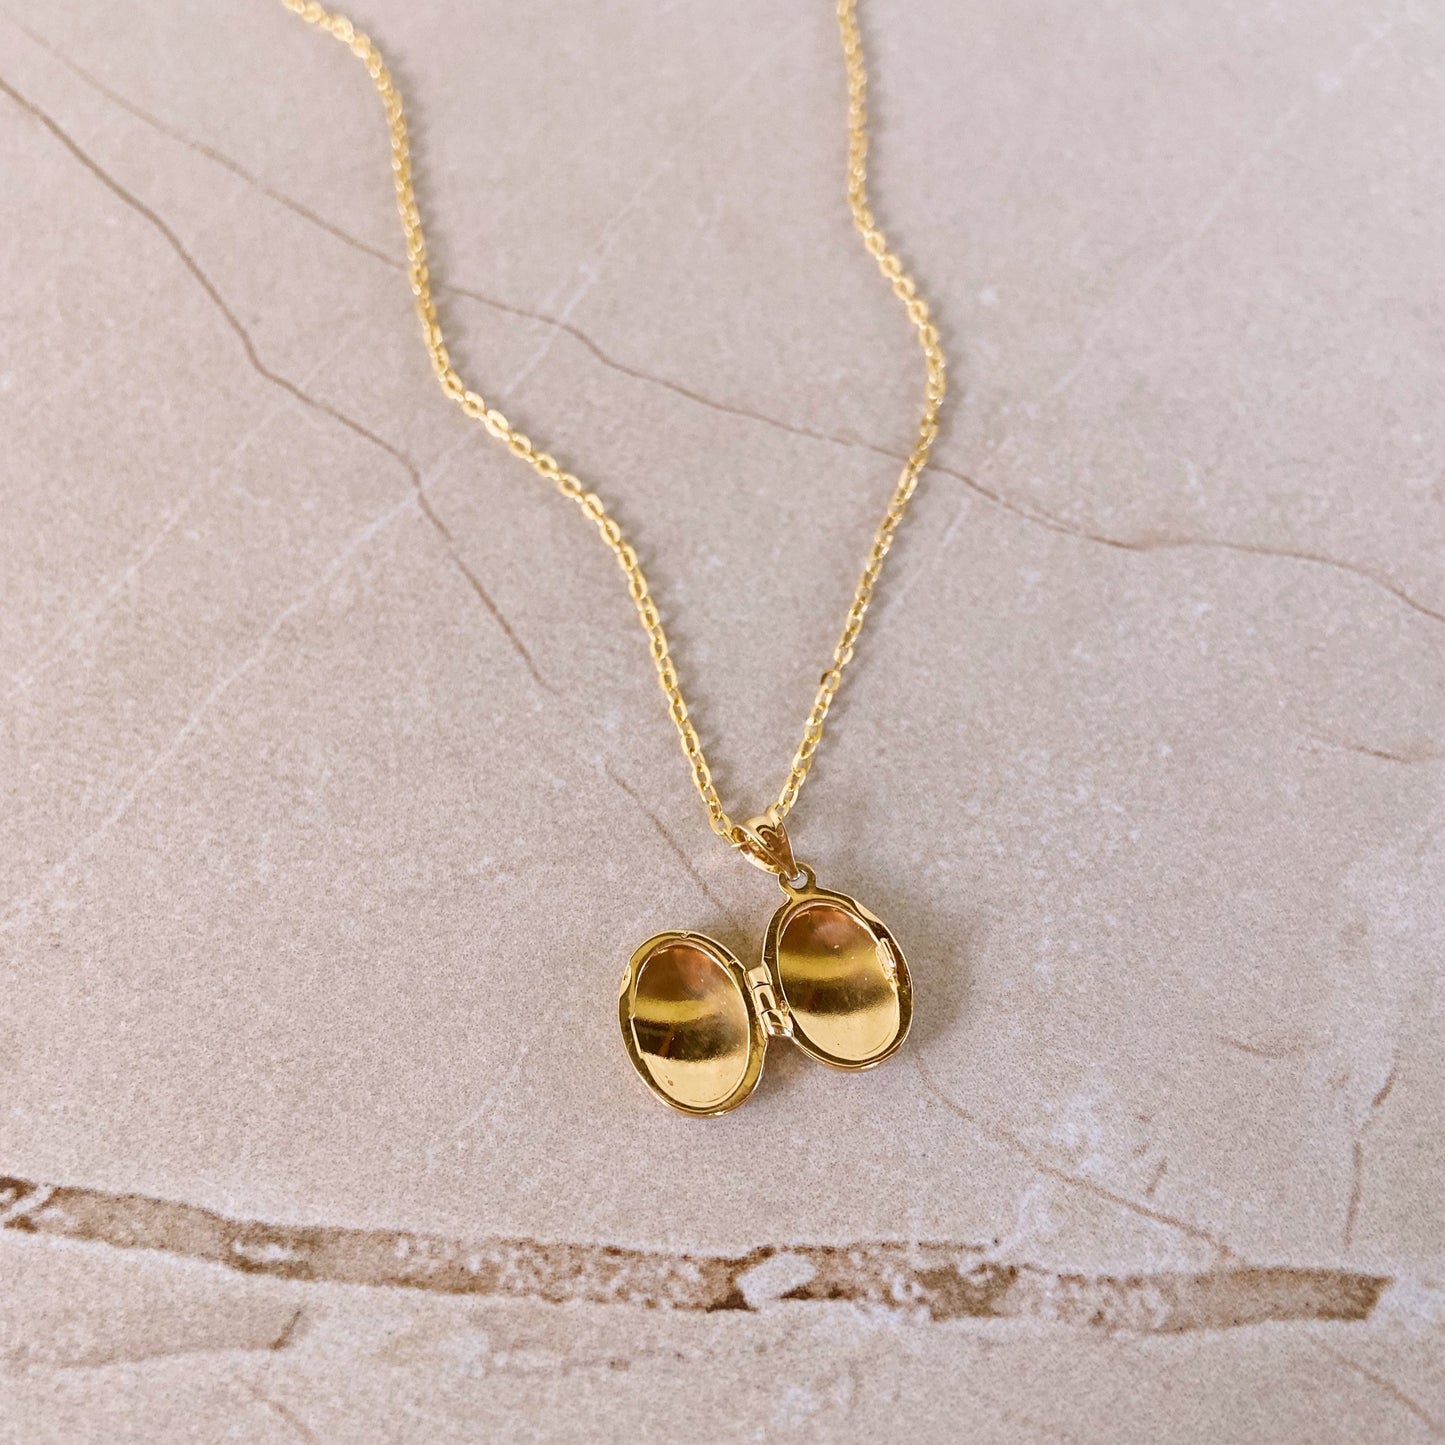 Oval Locket Necklace in 18K Gold